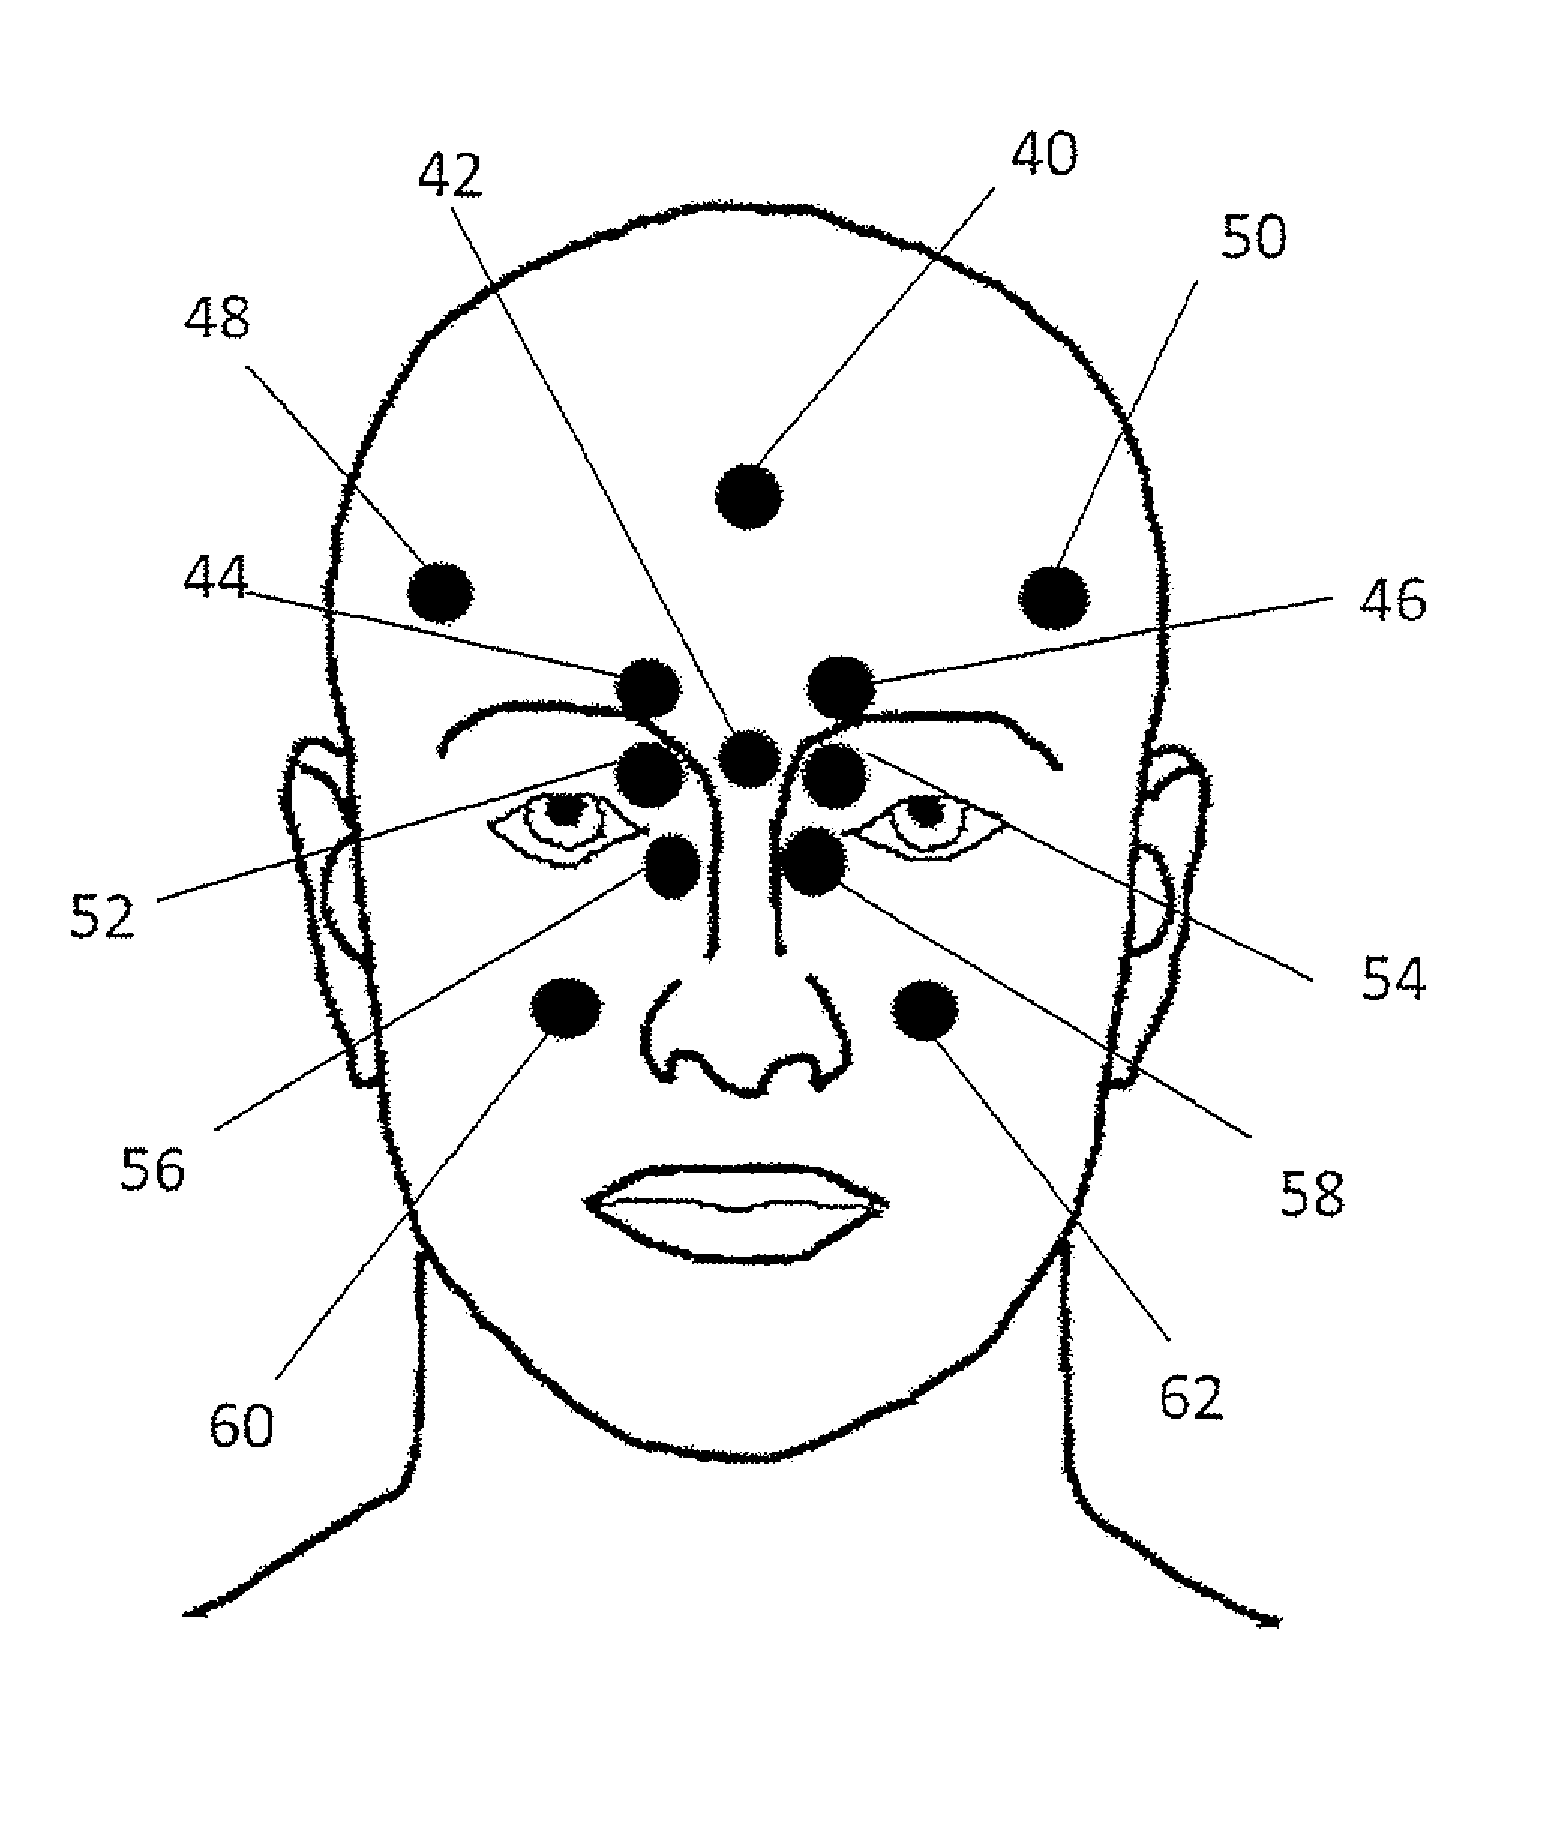 Method for diagnosing selected conditions using thermography